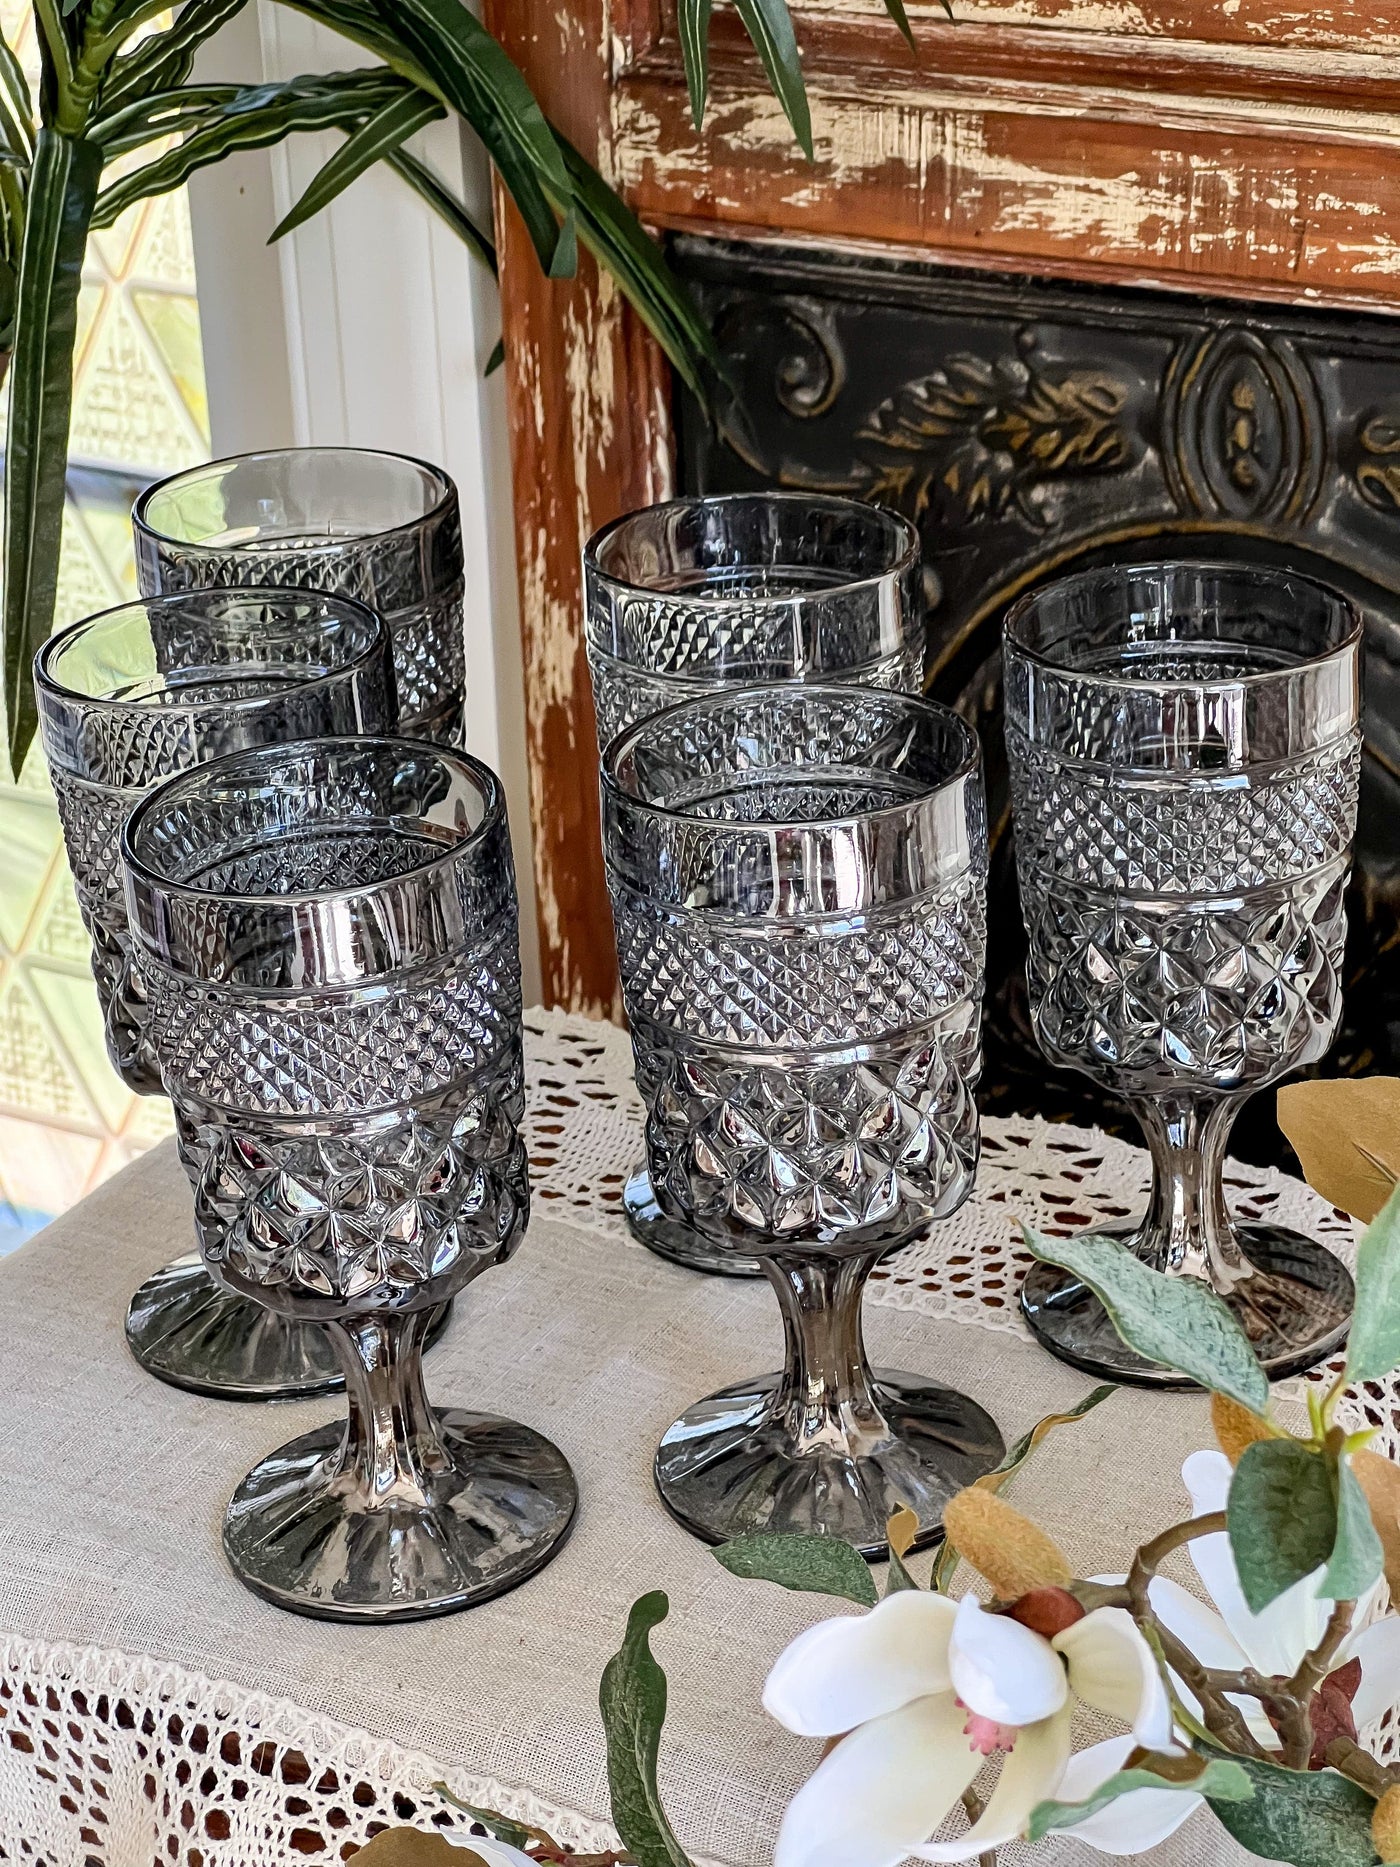 Set of 6 Vintage Anchor Hocking Wexford Water Glasses / Wine Goblets in Rare Smoke Metallic Revive In Style Vintage Furniture Painted Refinished Redesign Beautiful One of a Kind Artistic Antique Unique Home Decor Interior Design French Country Shabby Chic Cottage Farmhouse Grandmillenial Coastal Chalk Paint Metallic Glam Eclectic Quality Dovetailed Rustic Furniture Painter Pinterest Bedroom Living Room Entryway Kitchen Home Trends House Styles Decorating ideas